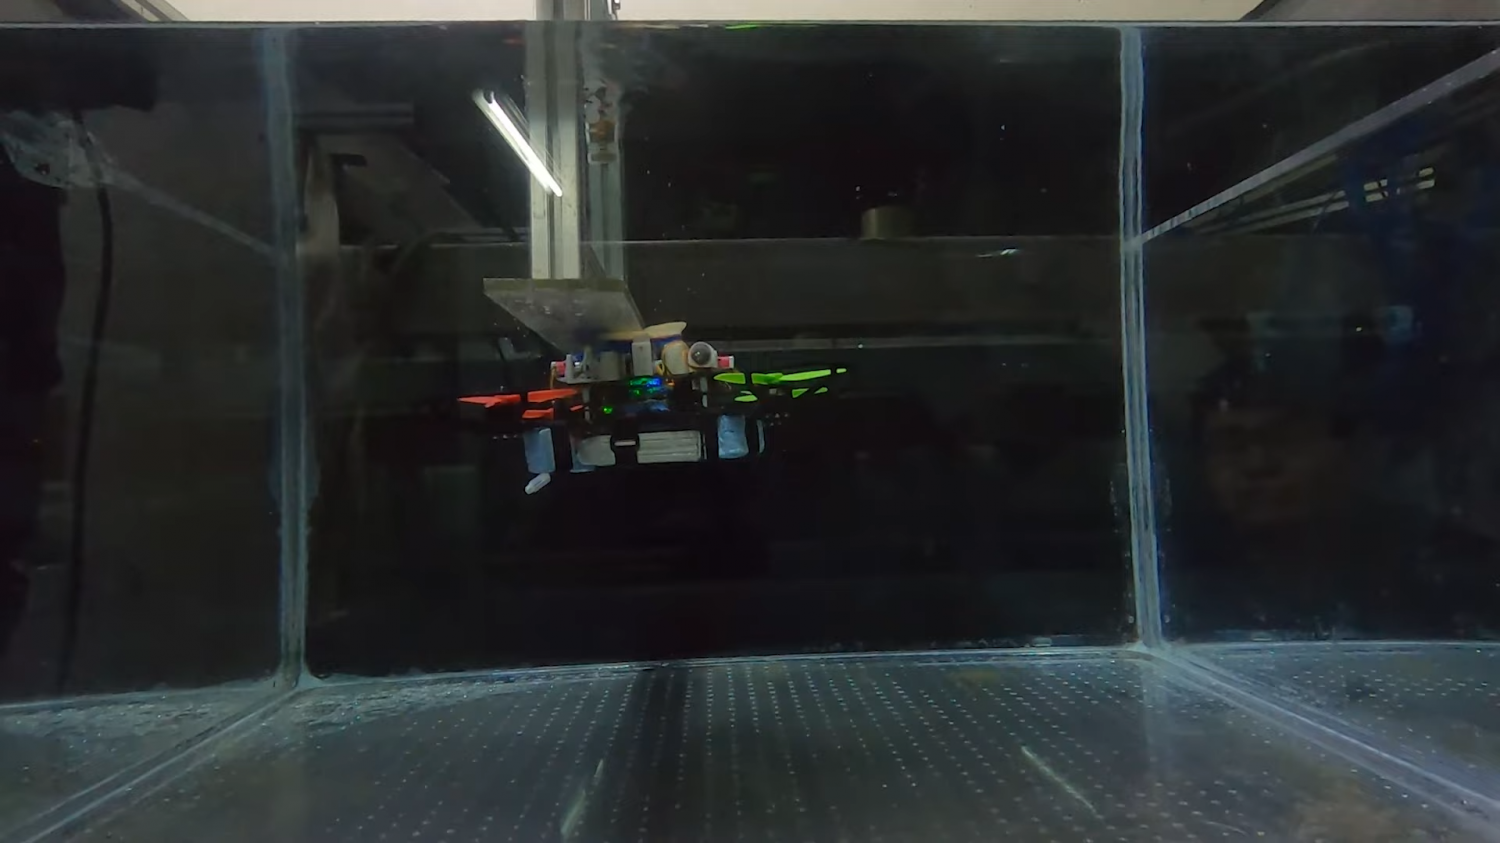 Global team of robotics experts build a drone capable of aerial and aquatic travel, as well as 